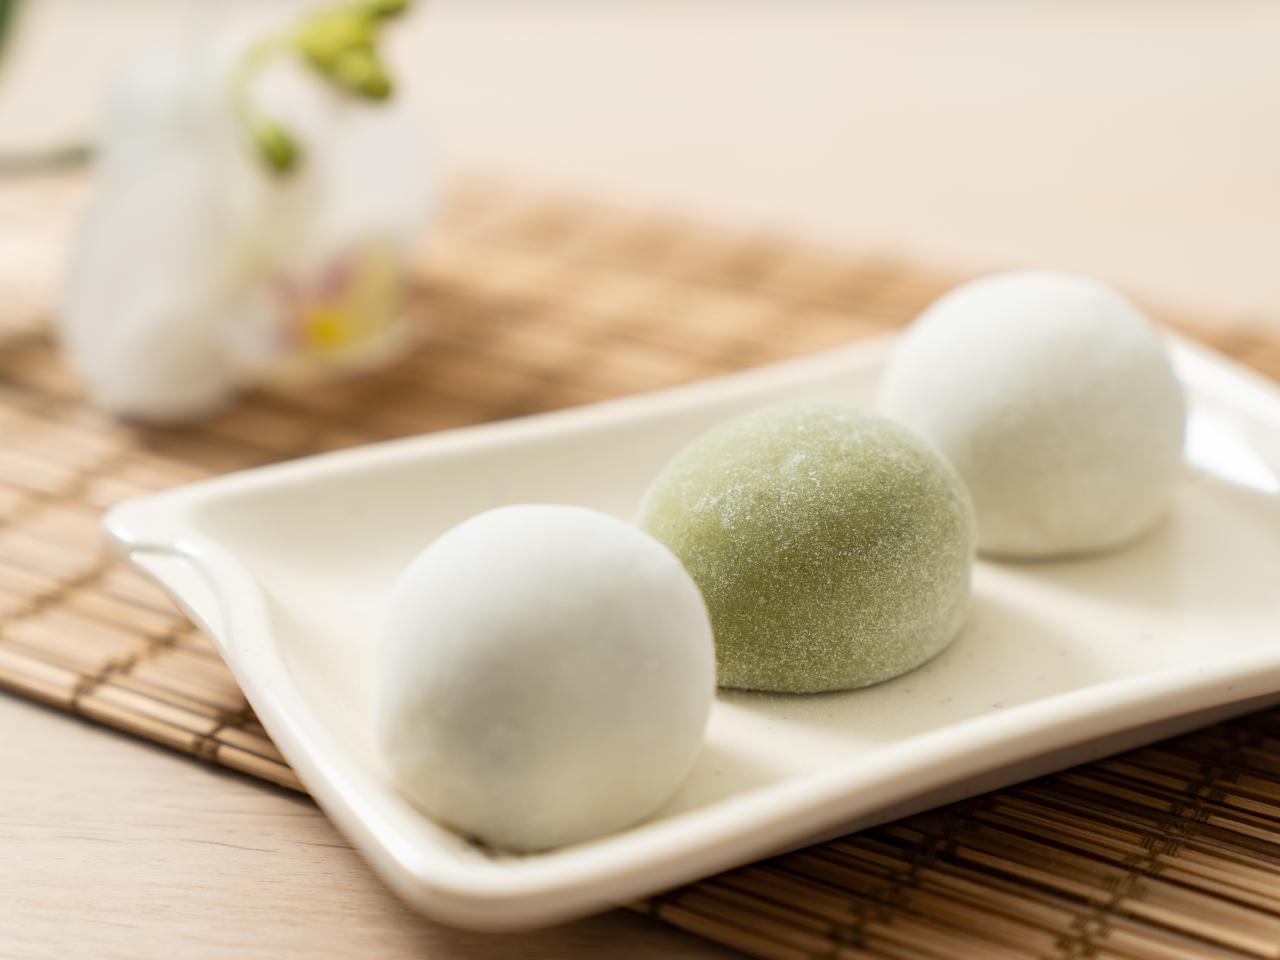 Delicious but deadly mochi: The Japanese rice cakes that kill - BBC News